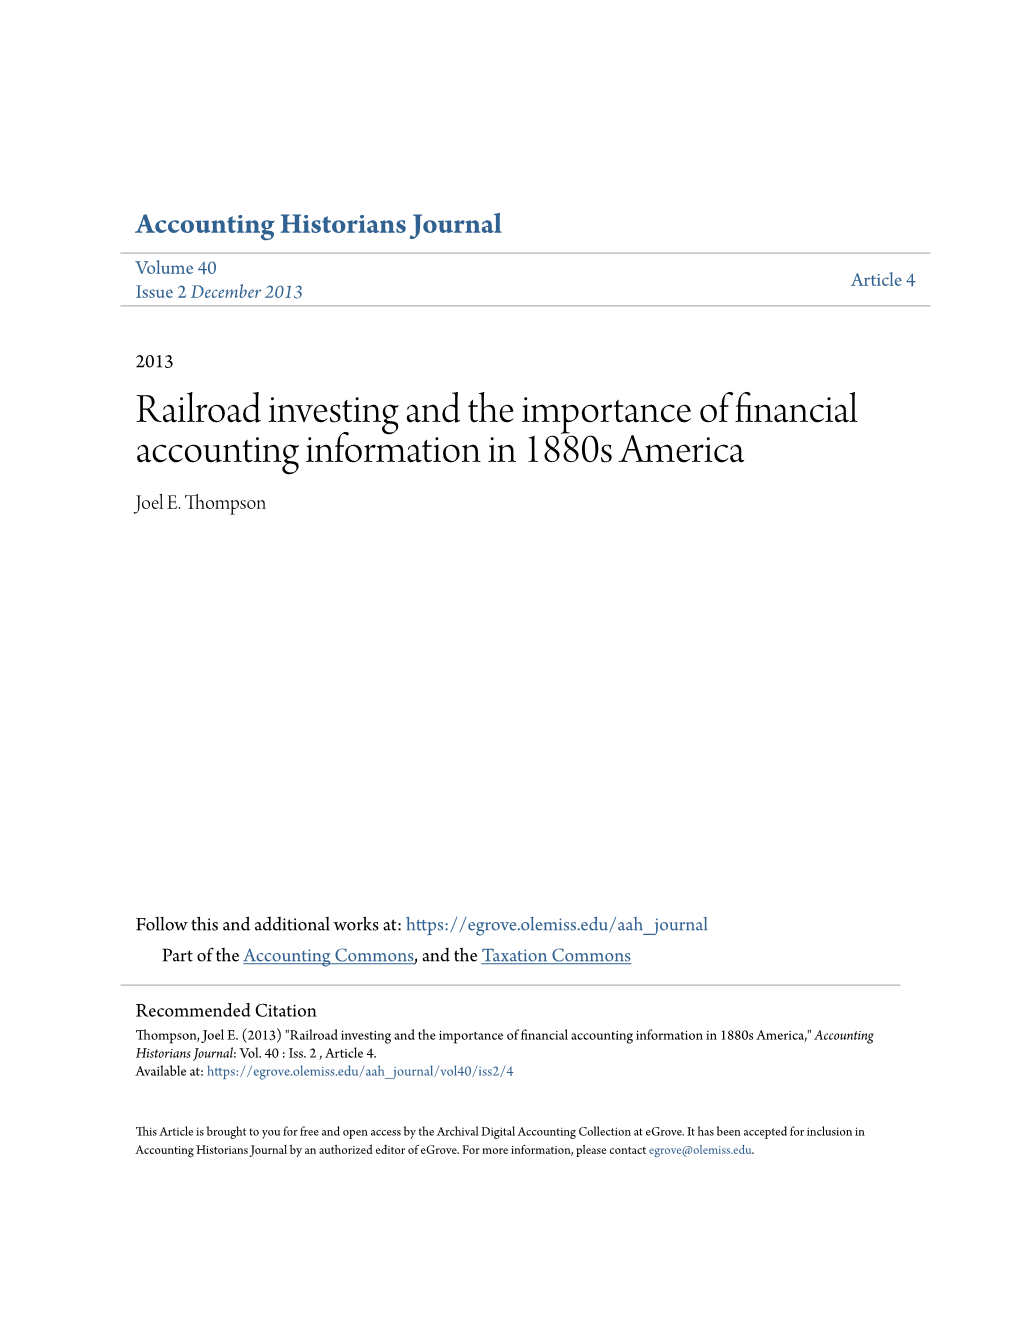 Railroad Investing and the Importance of Financial Accounting Information in 1880S America Joel E